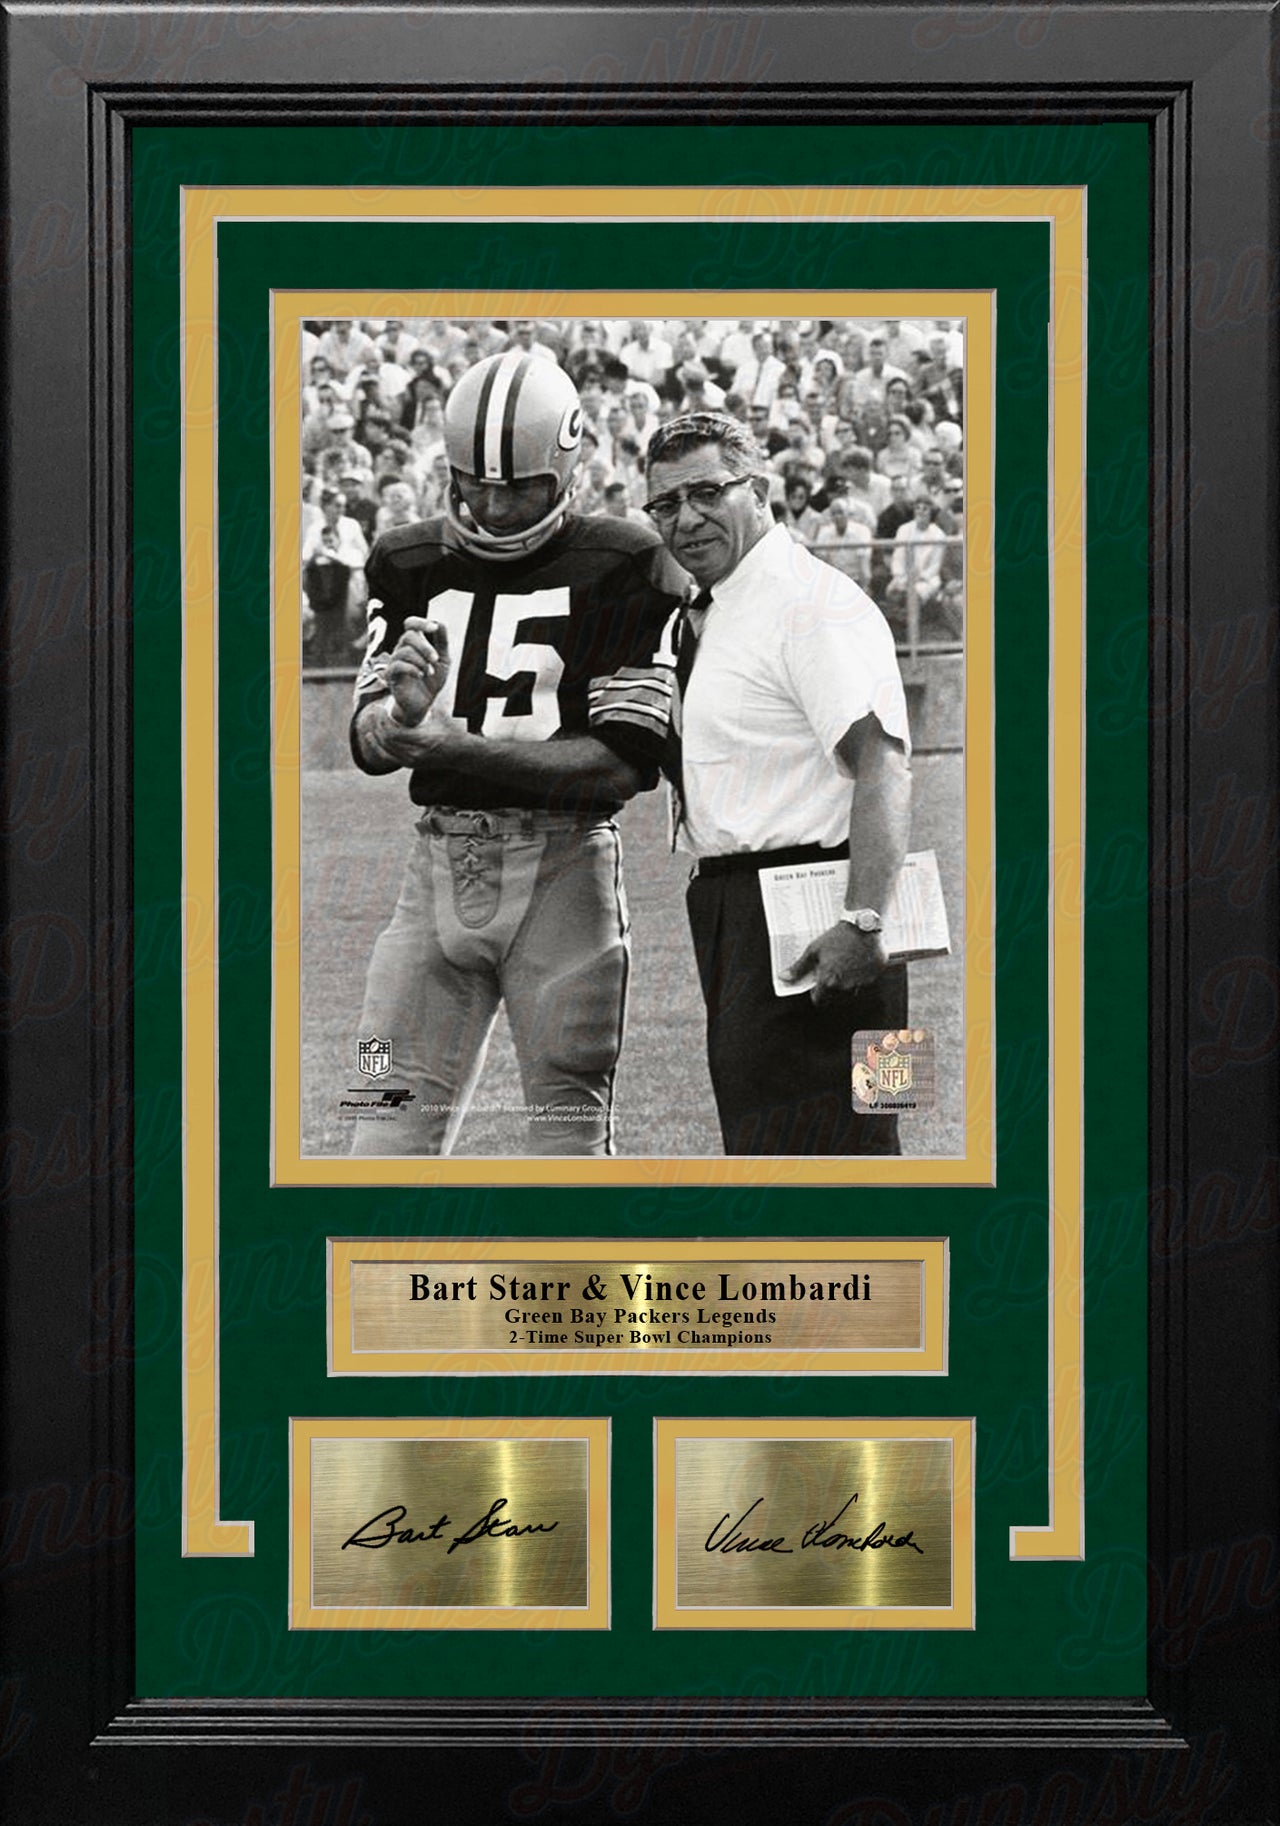 Bart Starr & Vince Lombardi Green Bay Packers 8x10 Framed Football Photo with Engraved Autographs - Dynasty Sports & Framing 